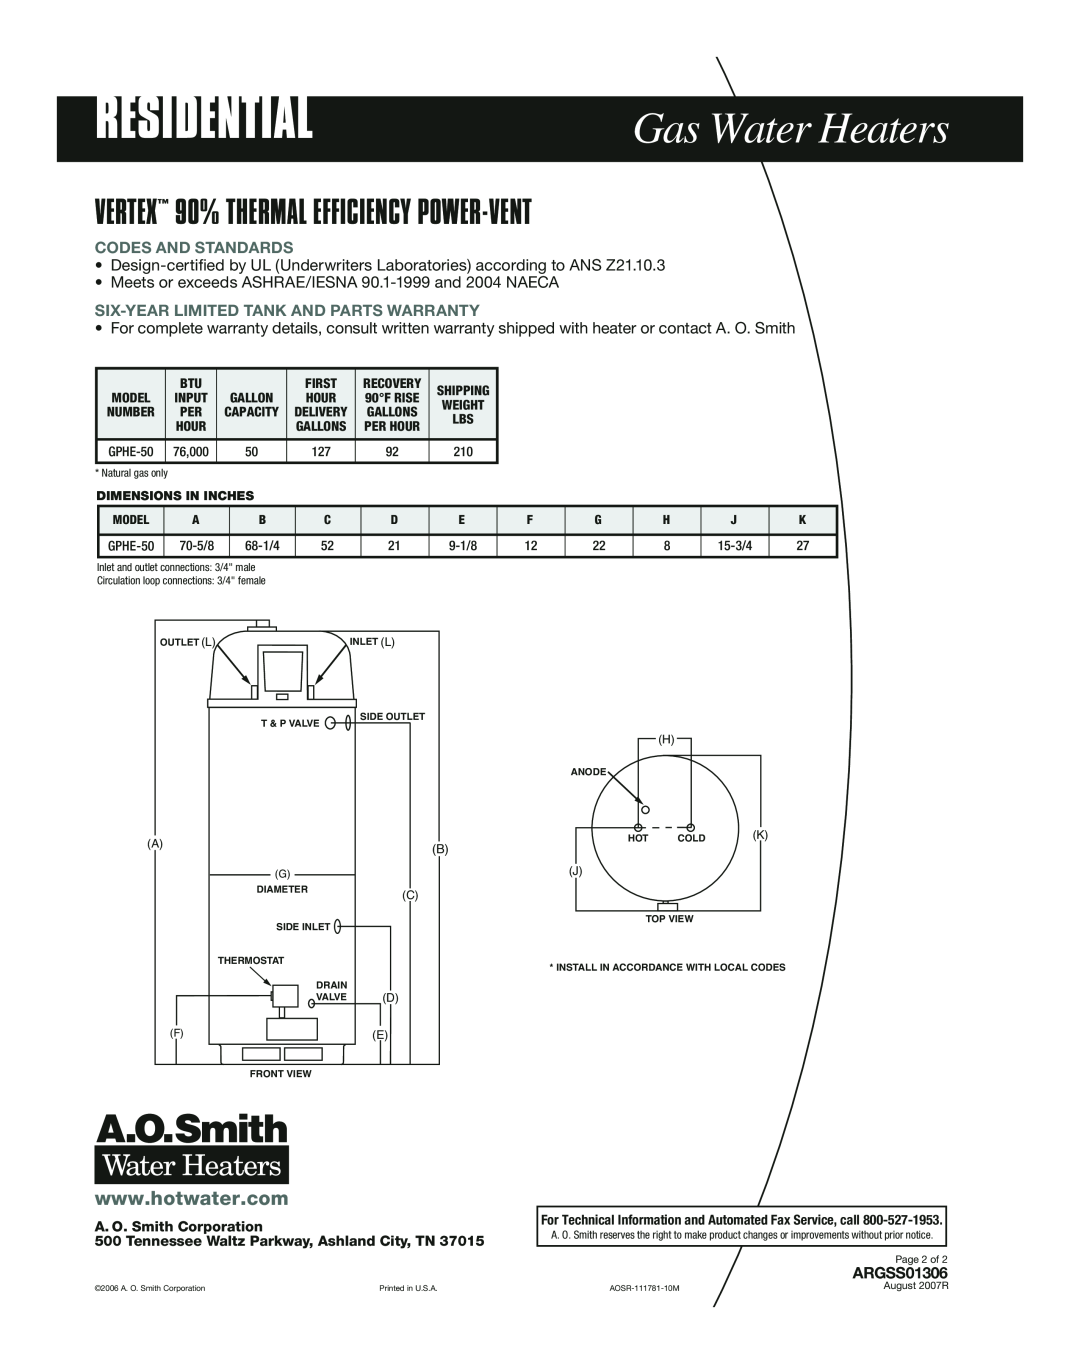 A.O. Smith GPHE-50 manual Residential, Gas Water Heaters, VERTEX 90% THERMAL EFFICIENCY POWER-VENT, ARGSS01306 